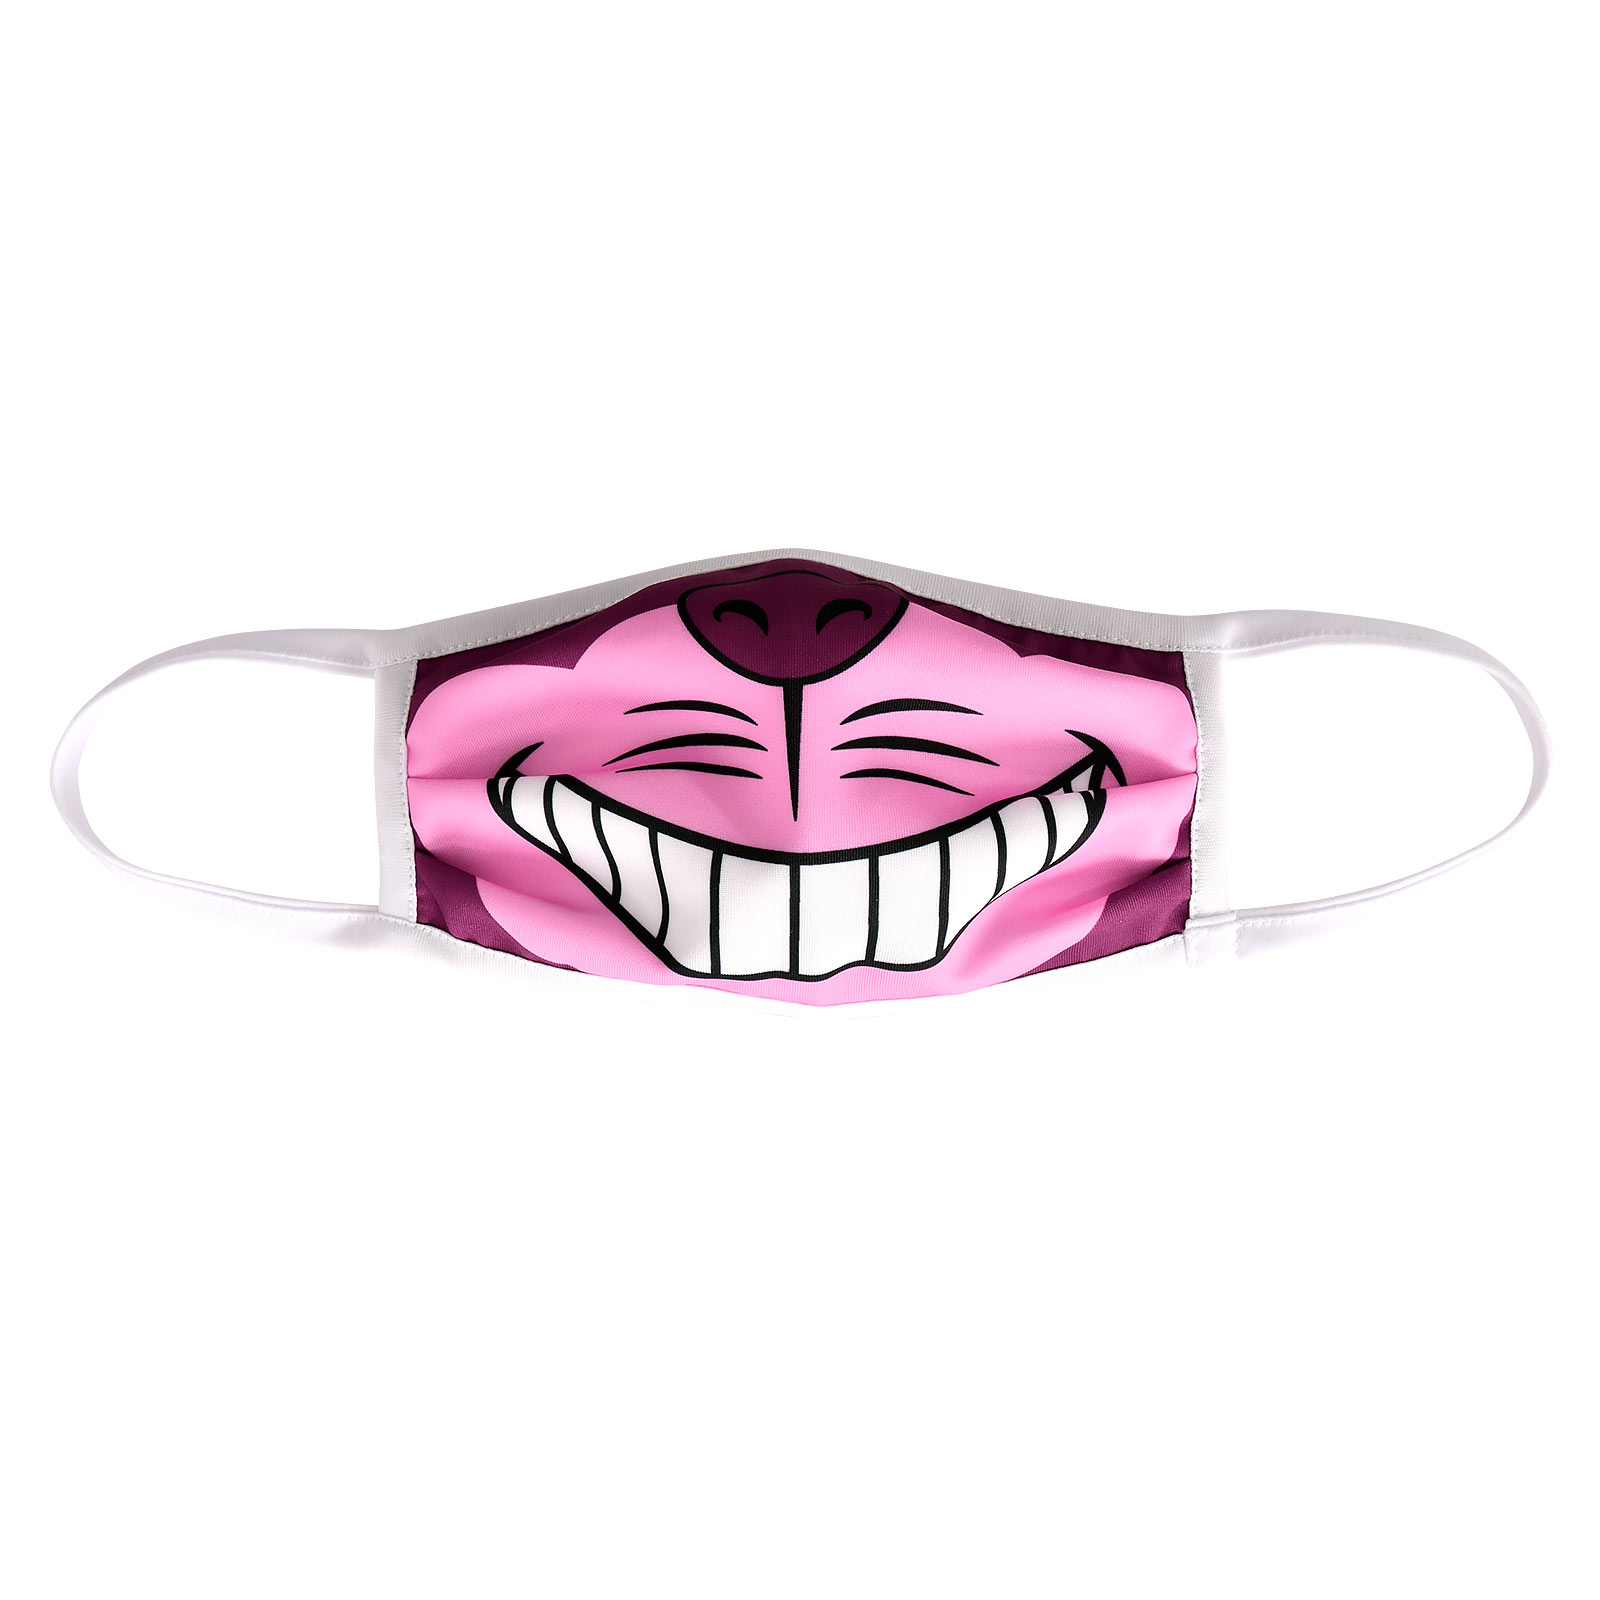 Cheshire Cat Face Mask for Alice in Wonderland Fans